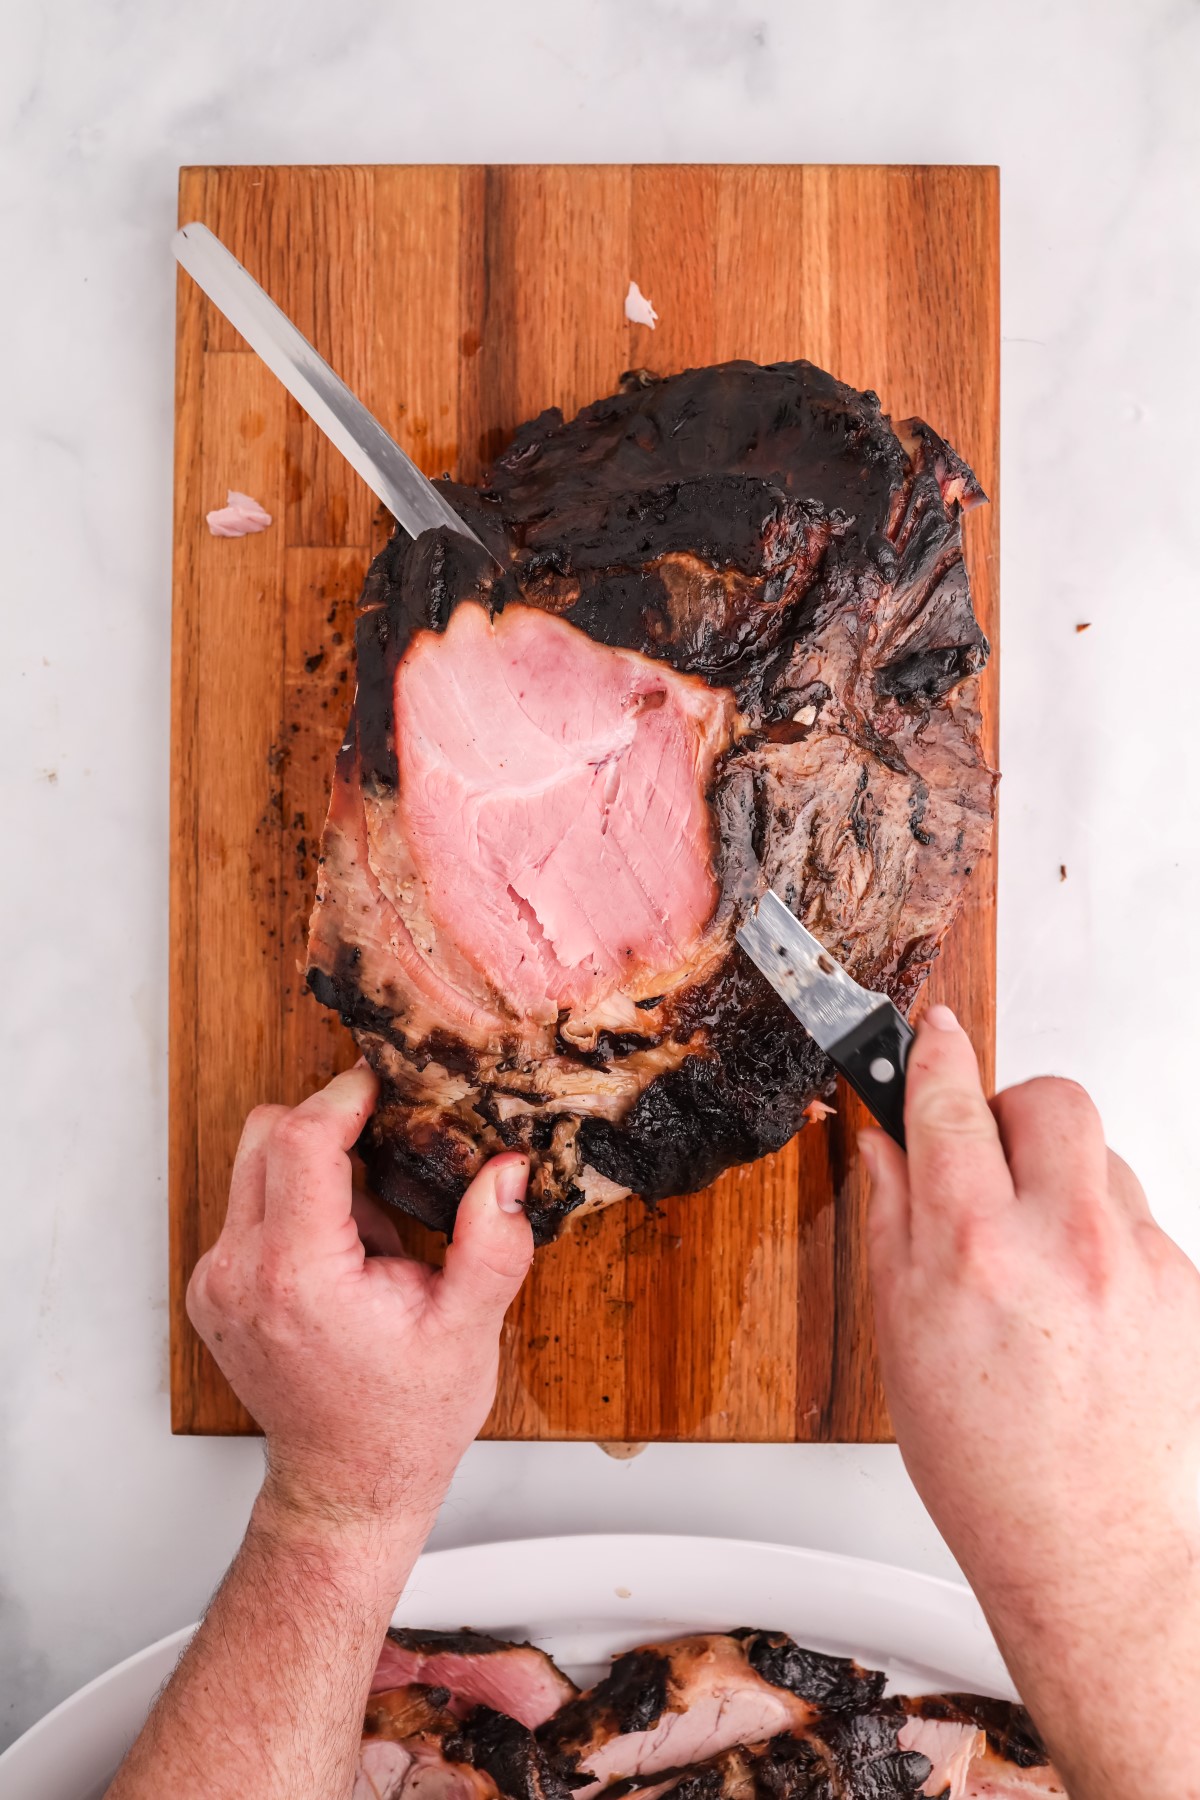 Smoked Full Bone-In Leg of Ham being sliced on a wooden cutting board.